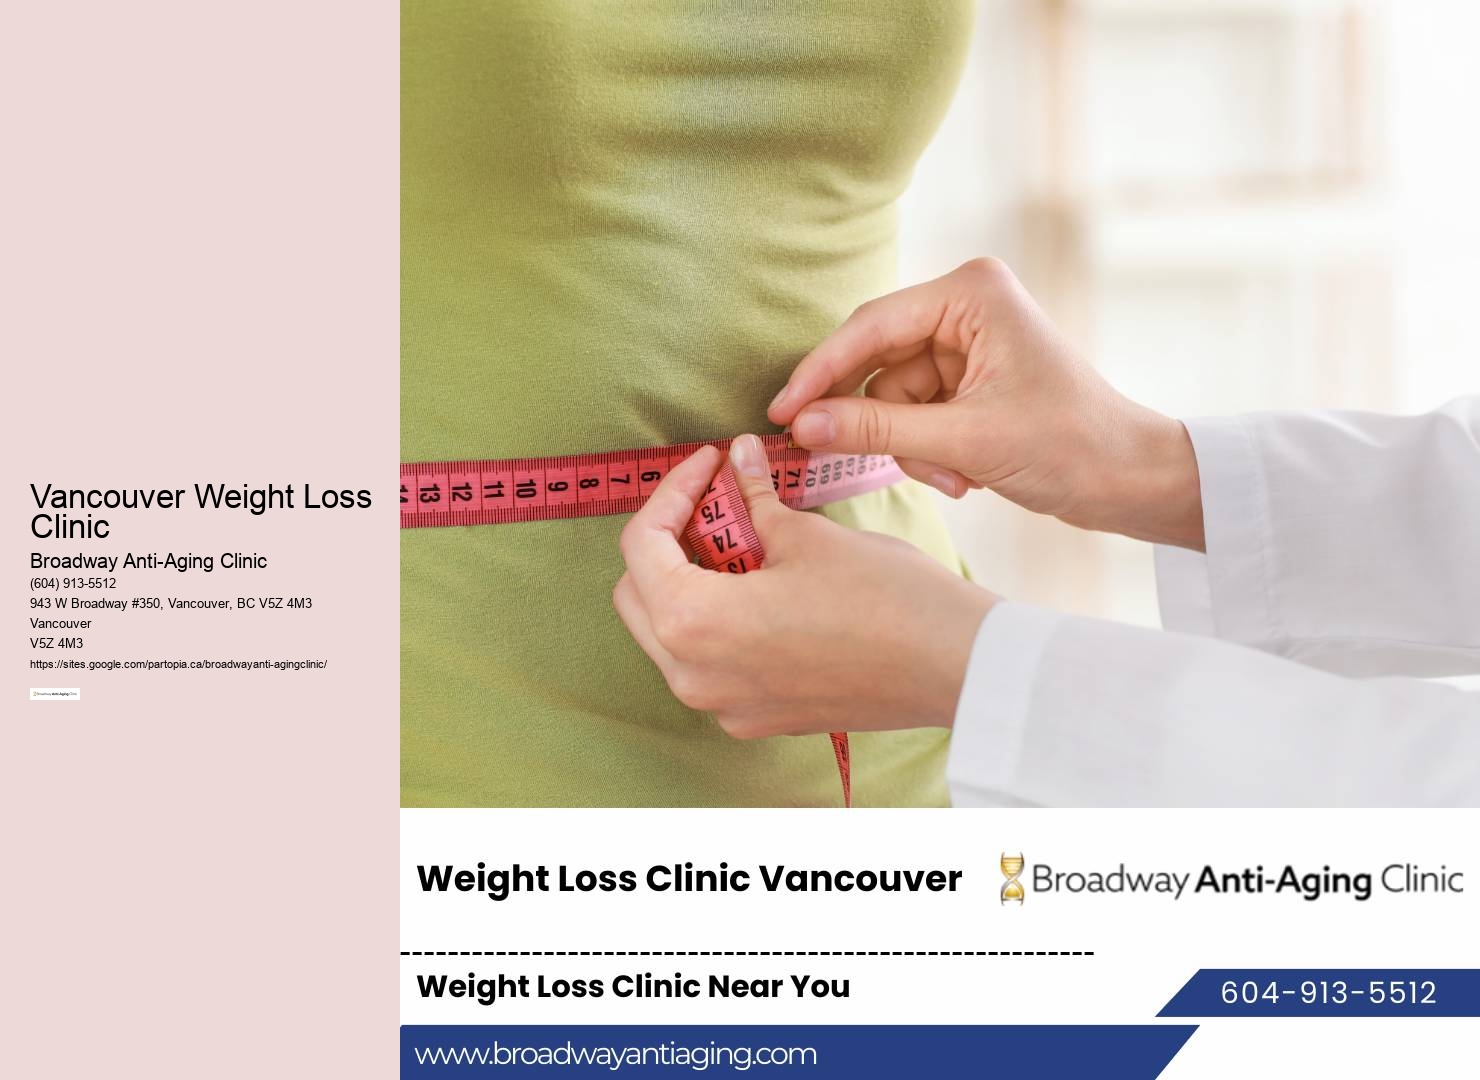 Medical weight loss treatments Vancouver promotions